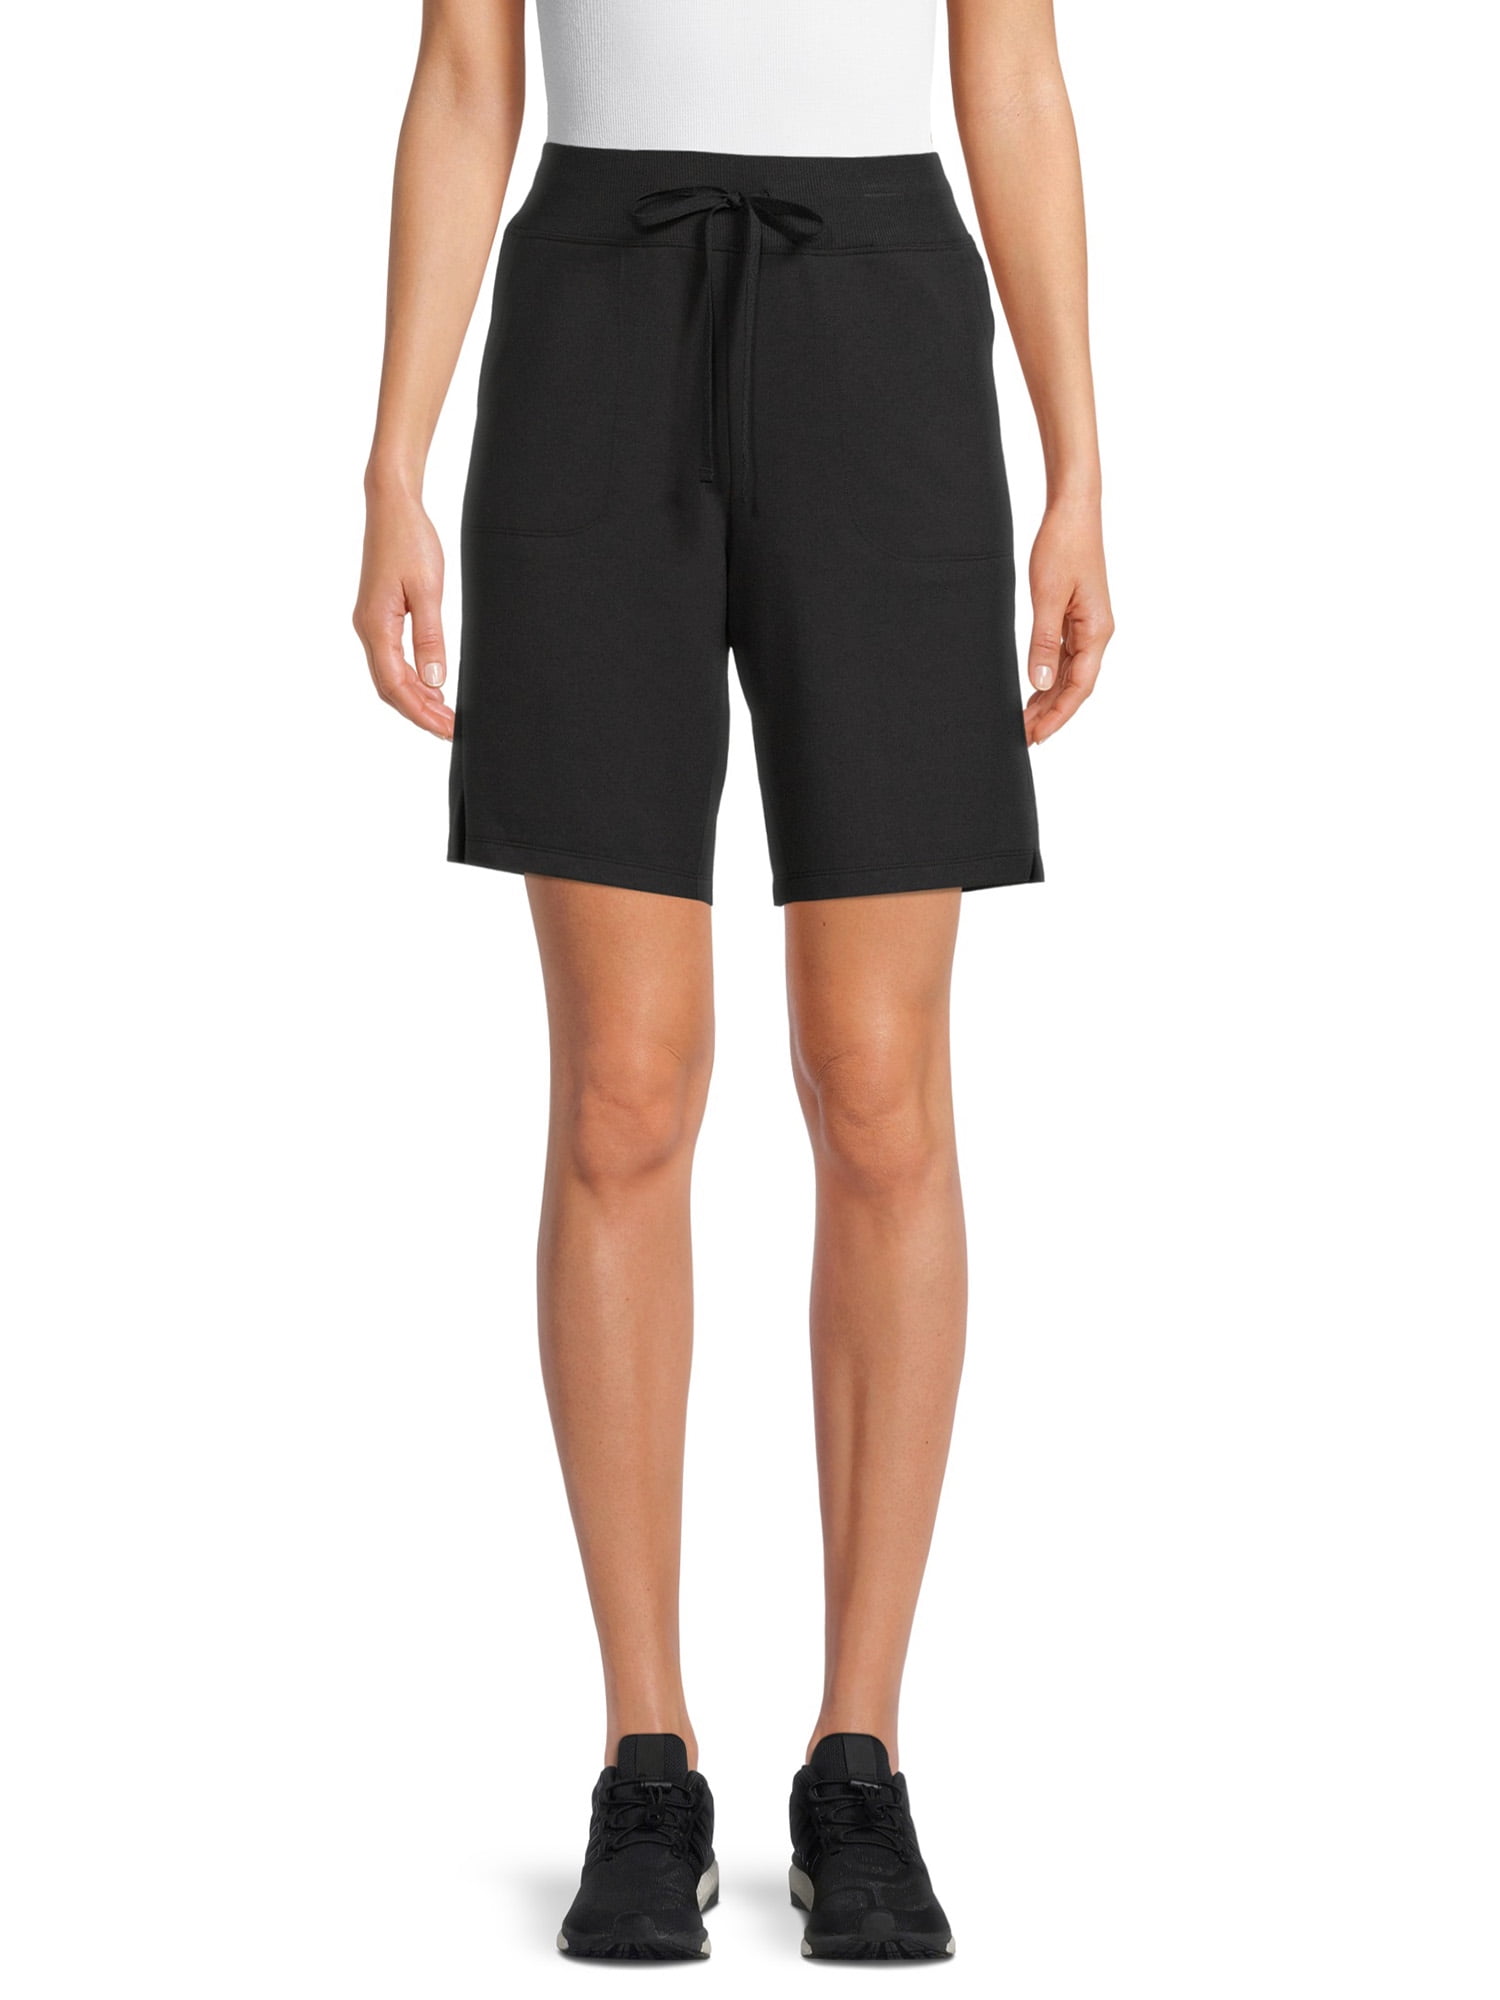 Athletic Works Women's French Terry Cloth Bermuda Shorts, Sizes XS-3XL ...